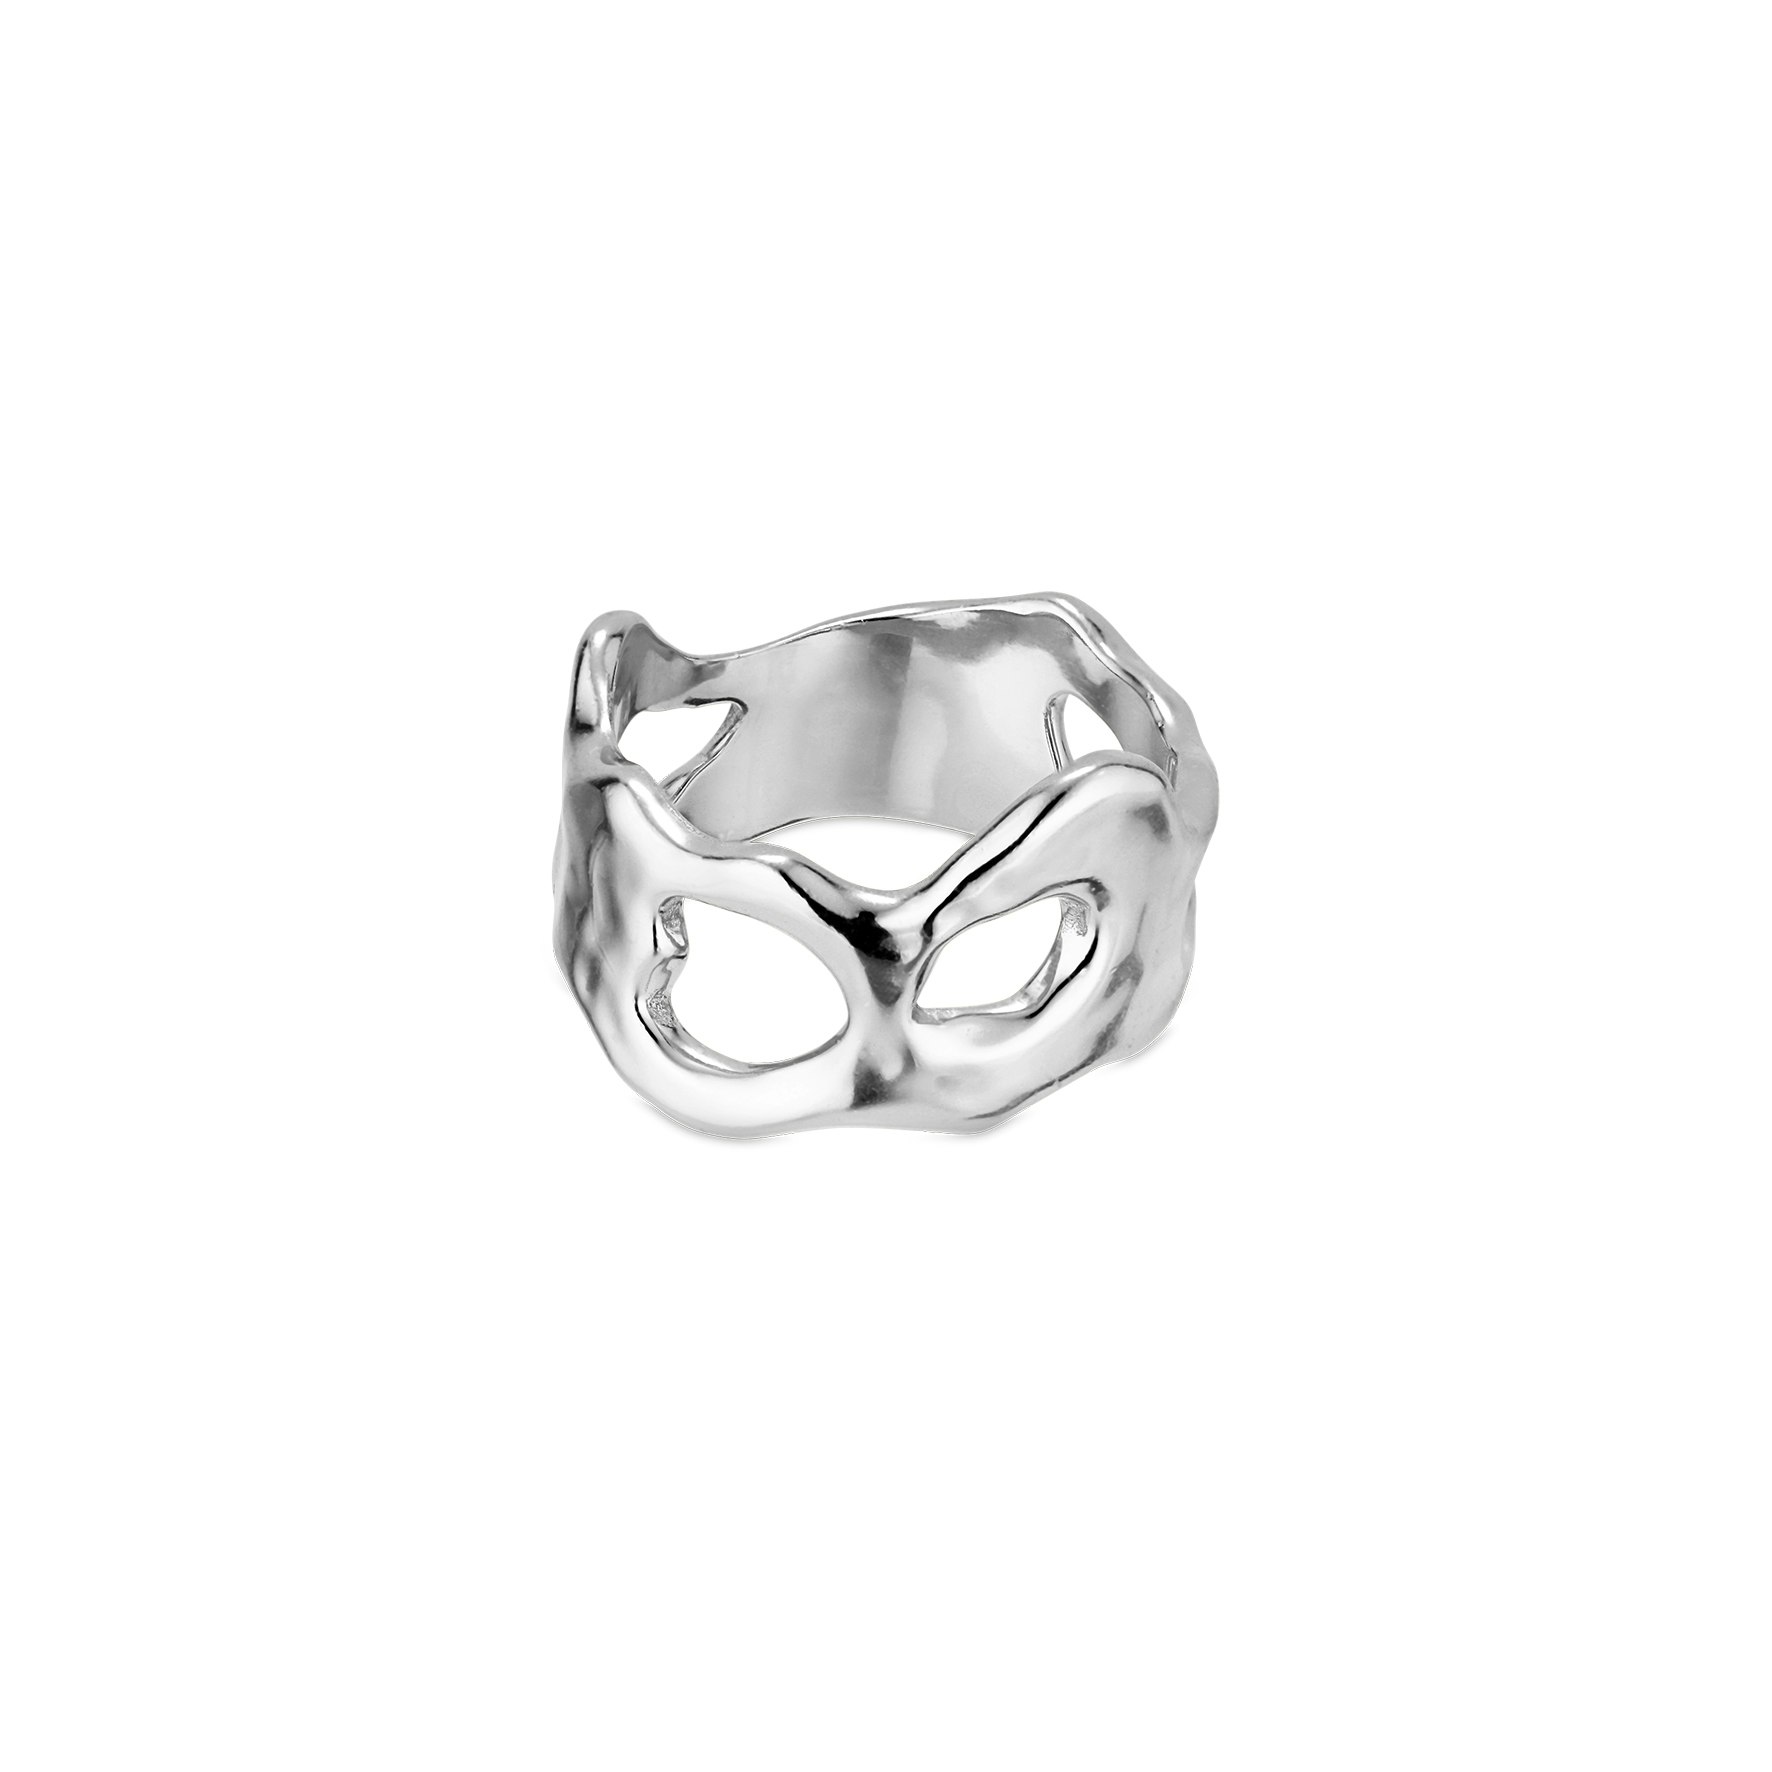 Medium butterfly Ring from Jane Kønig in Silver Sterling 925